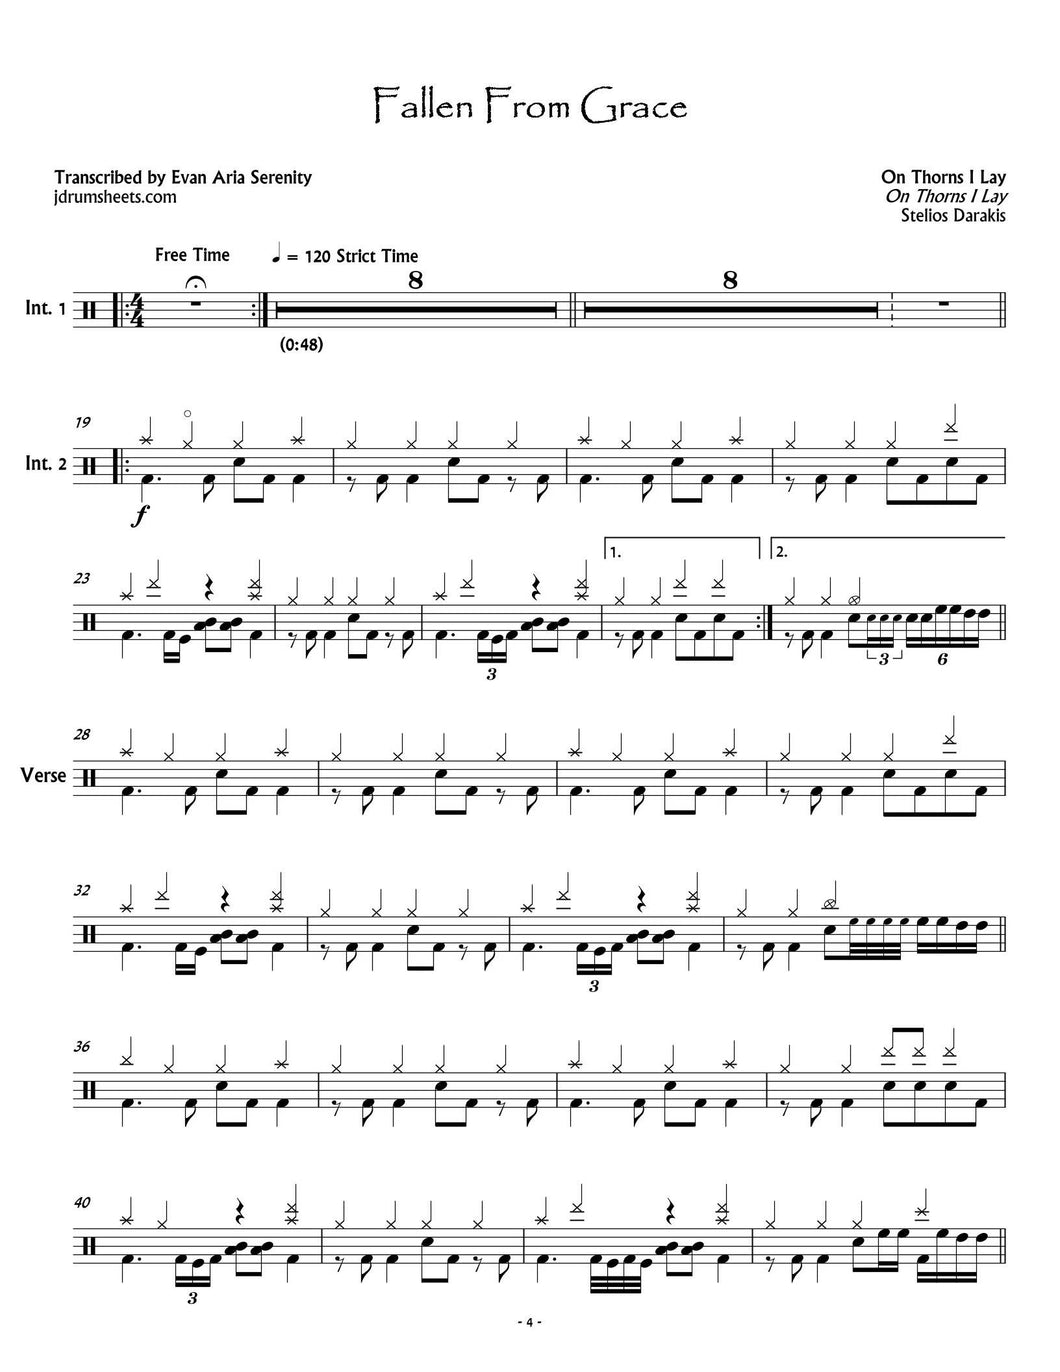 Fallen from Grace - On Thorns I Lay - Full Drum Transcription / Drum Sheet Music - Jaslow Drum Sheets